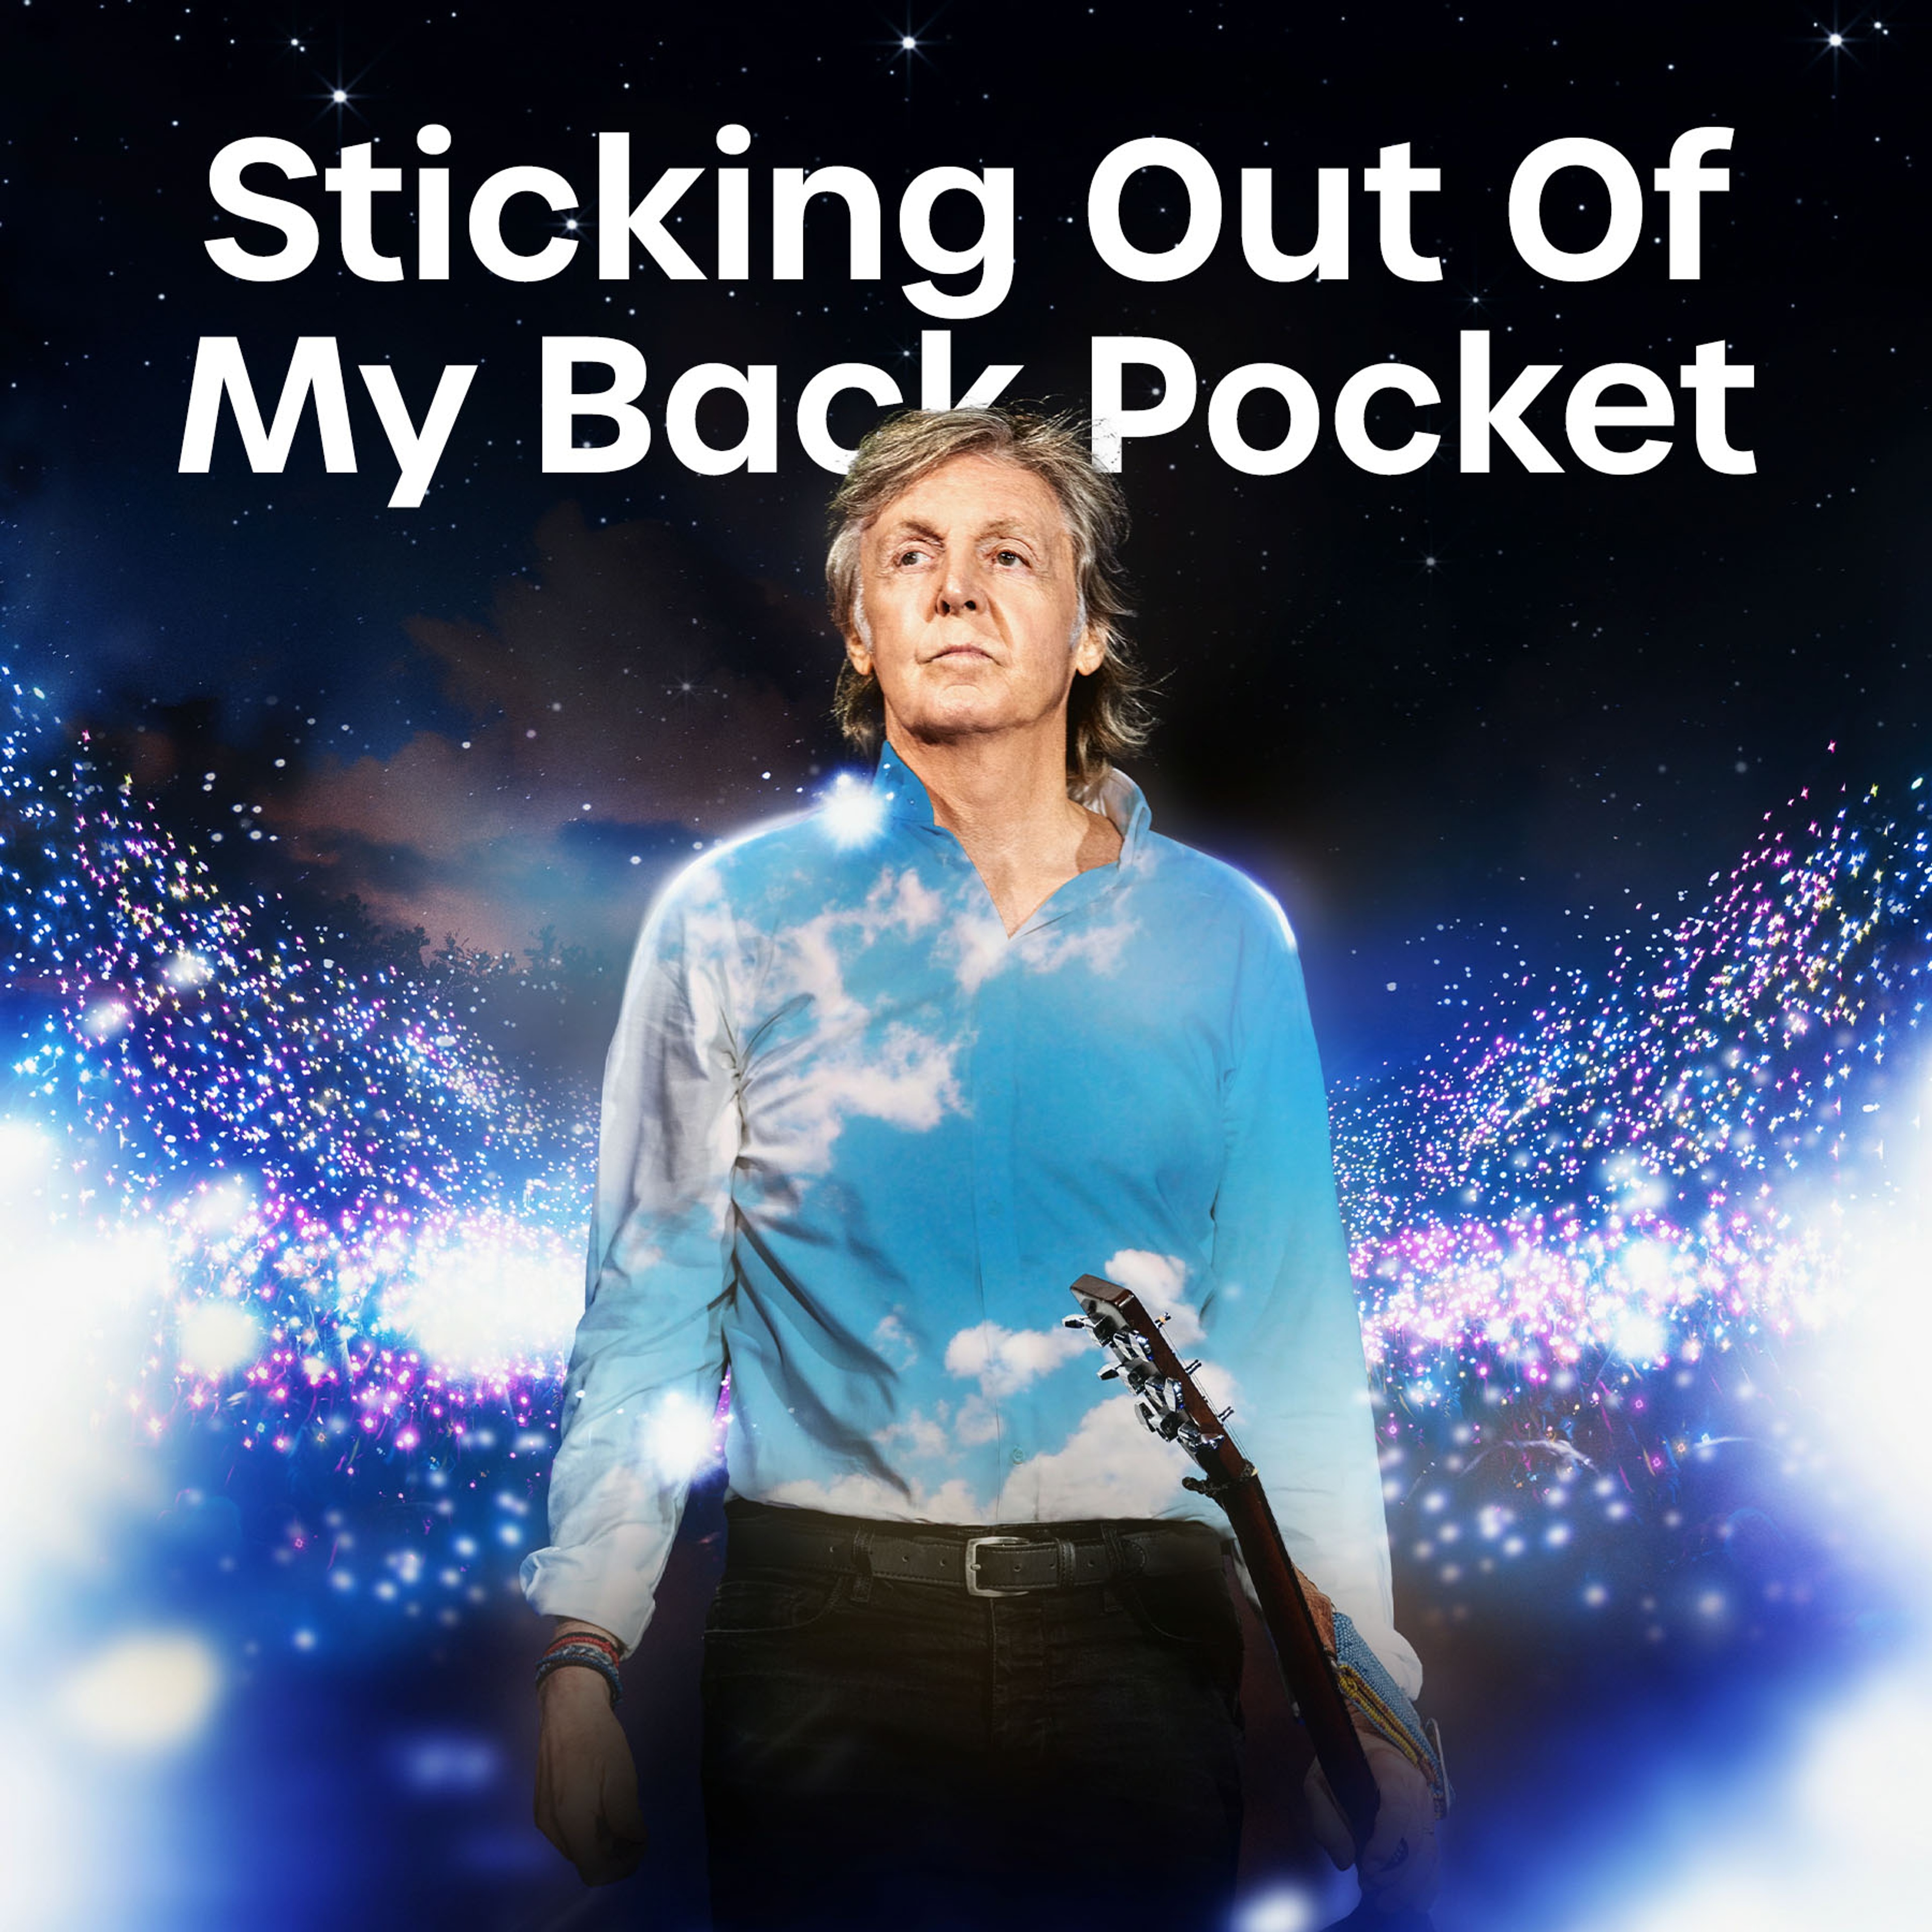 Tour poster for 'Got Back' tour 2023 featuring Paul wearing a cloud motif shirt, and the title 'Sticking Out Of My Back Pocket'